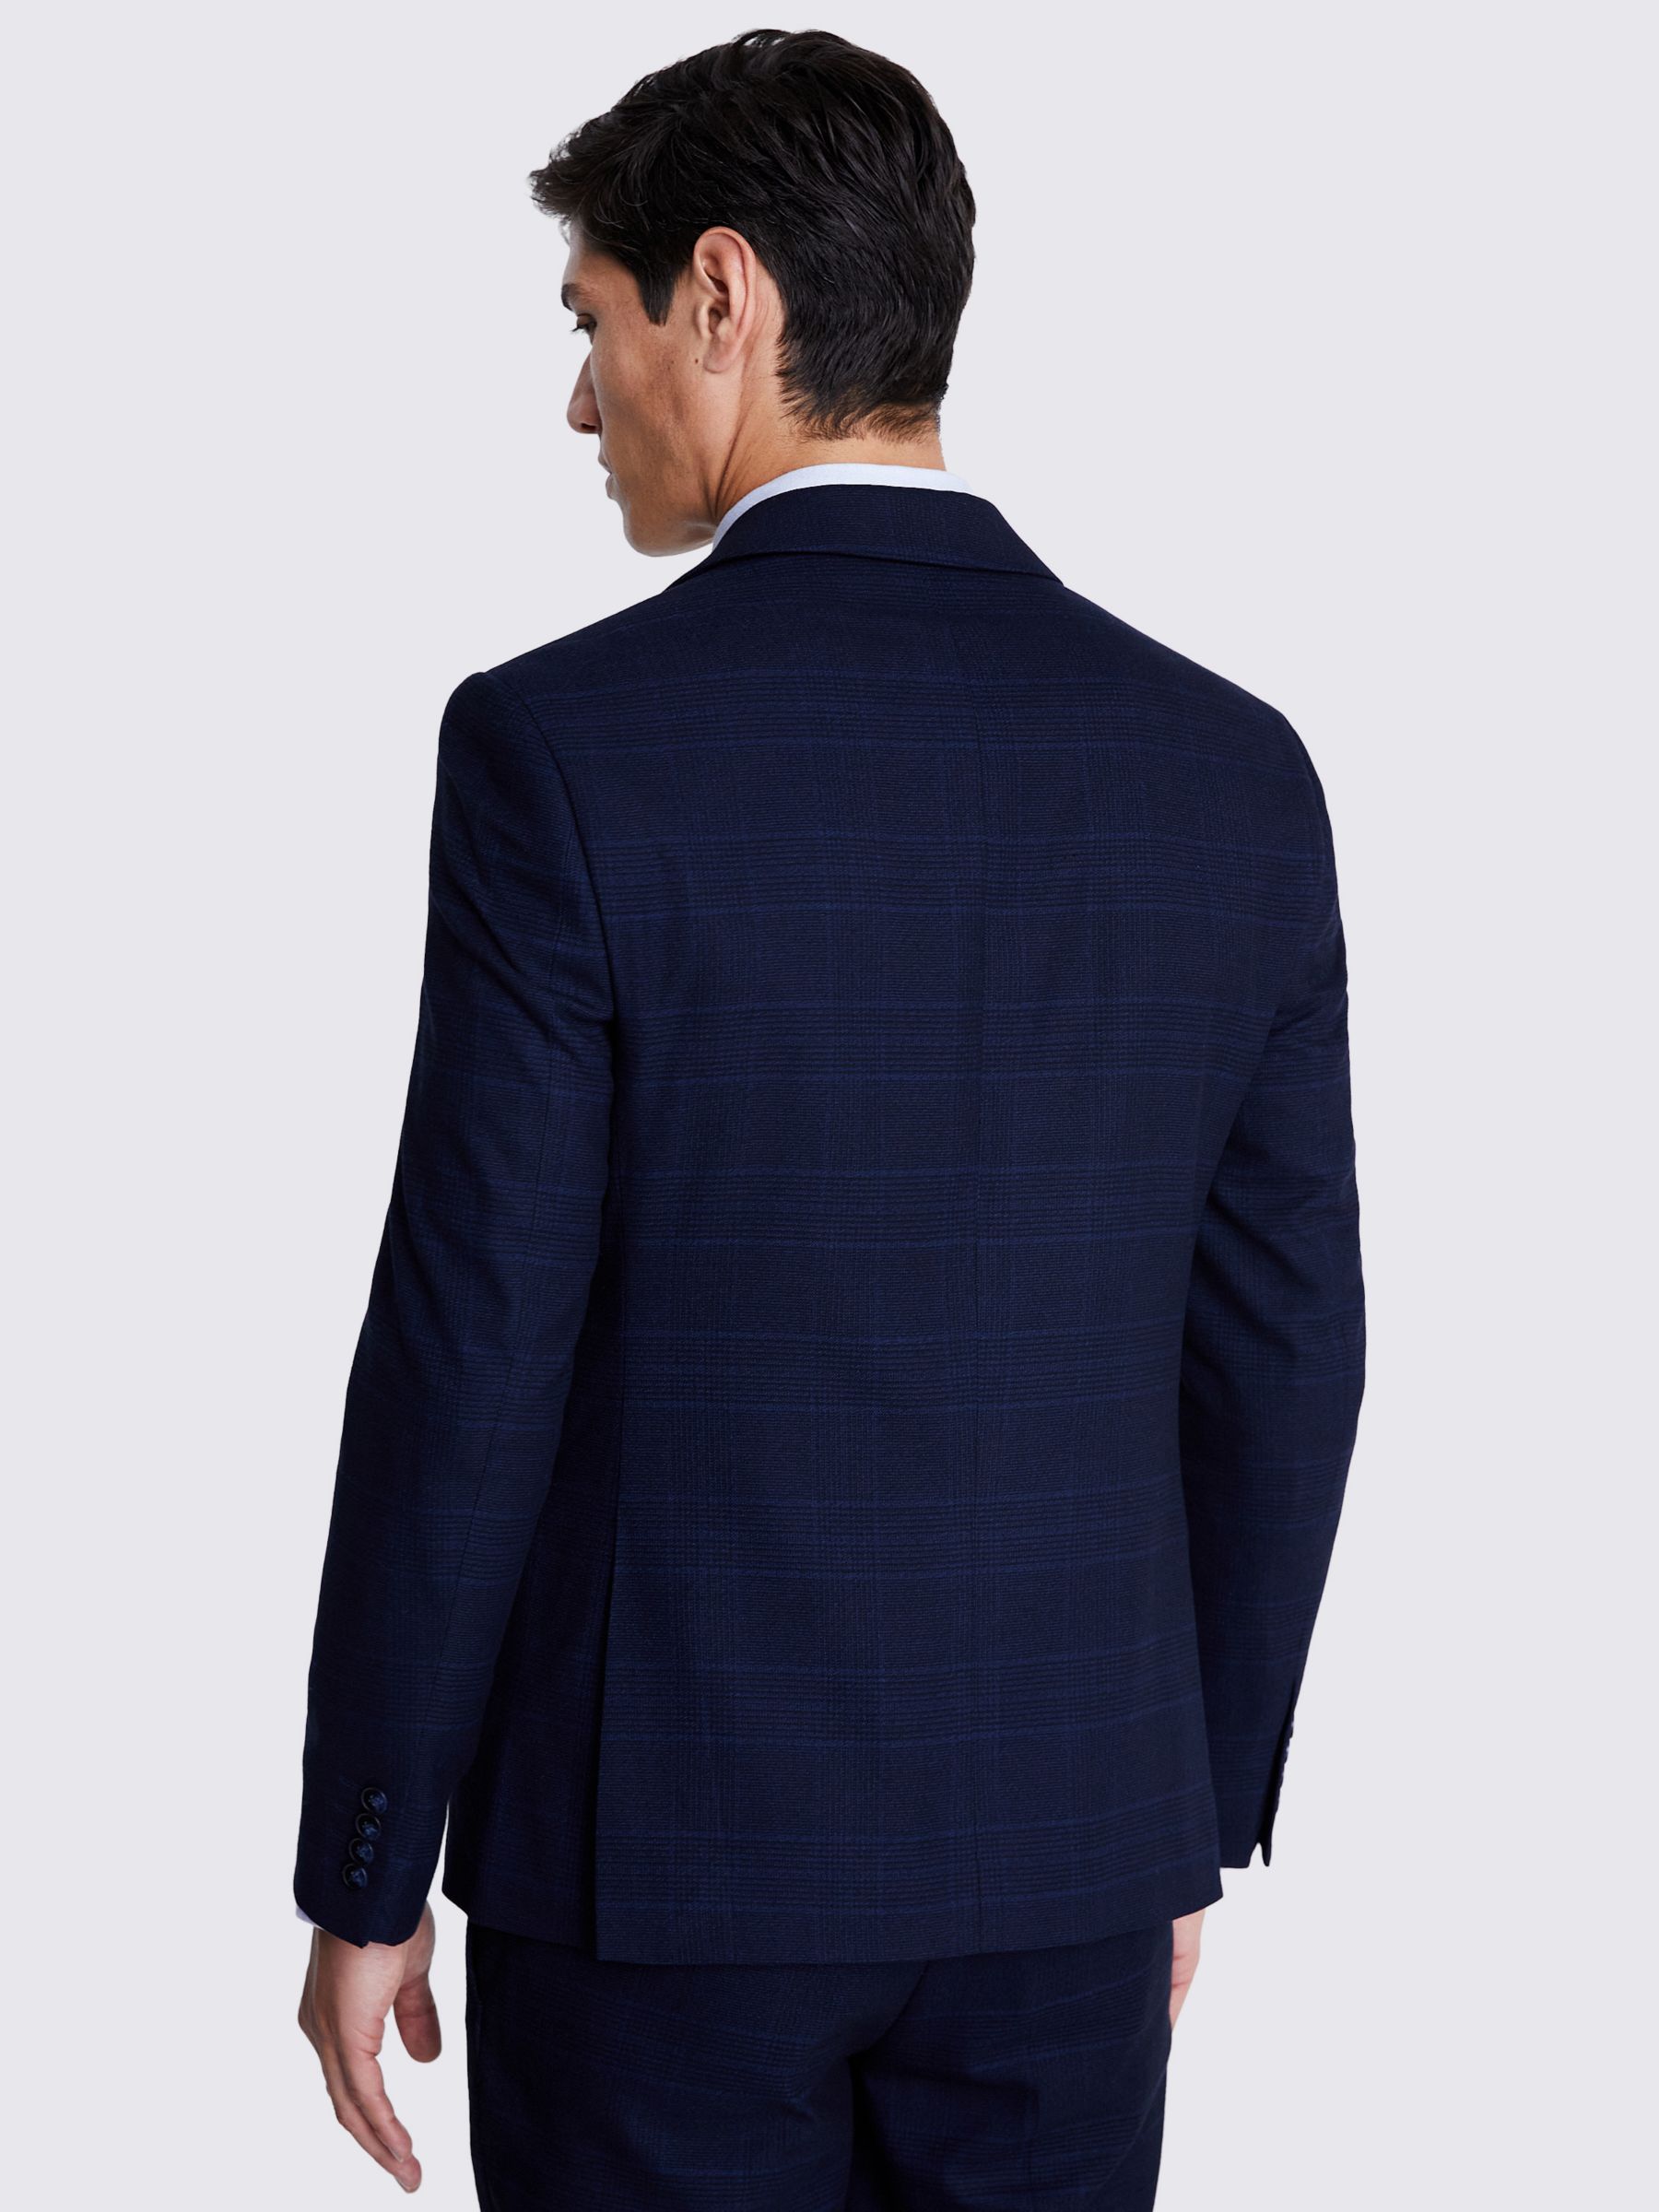 Moss Slim Fit Check Suit Jacket, Ink, 42R